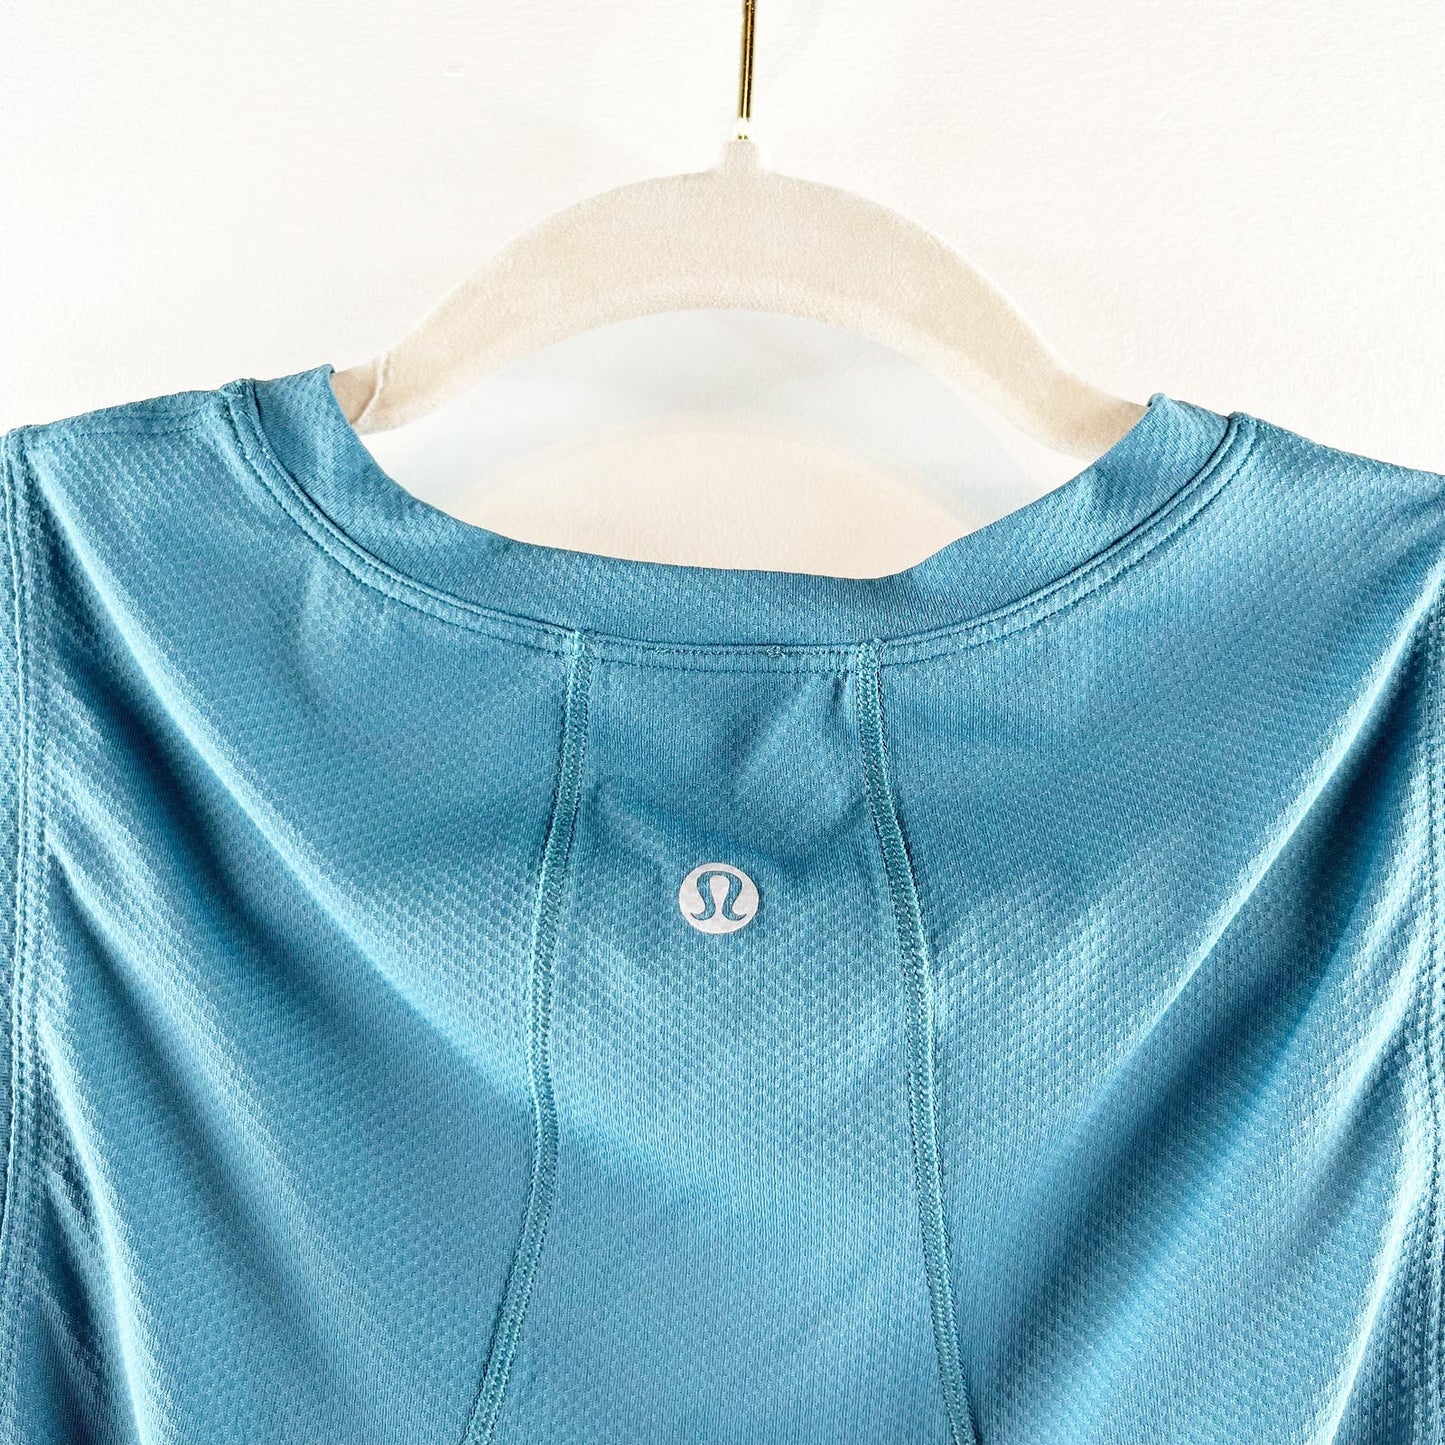 Lululemon Sleeeveless Cropped Workout Tank Top Teal Blue Green Small